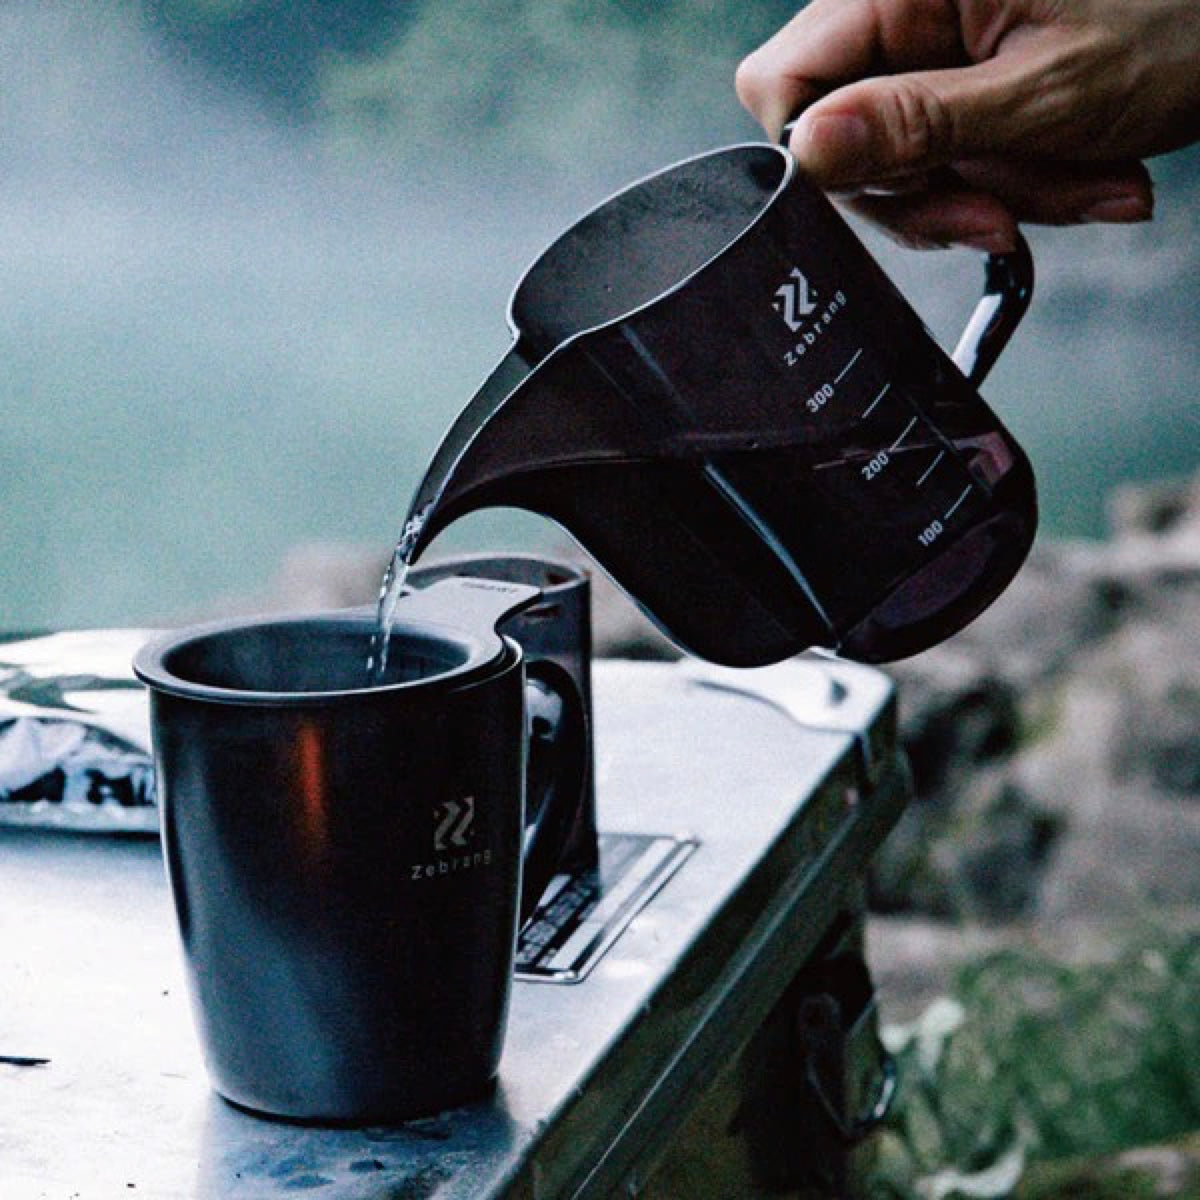 Hario Drip Kettle with Scale lifestyle 3